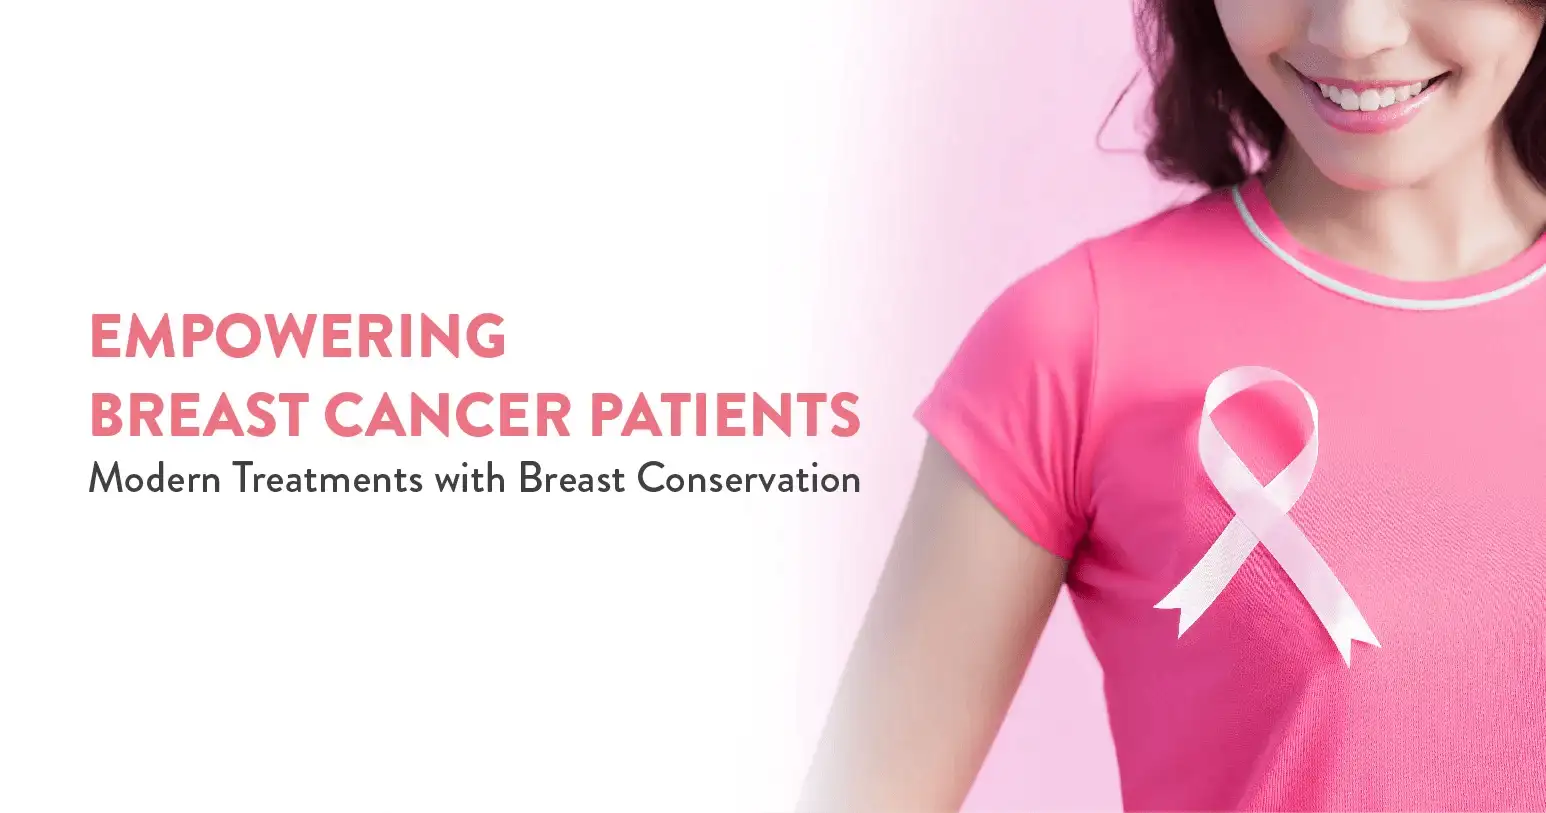 Empowering Breast Cancer Patients